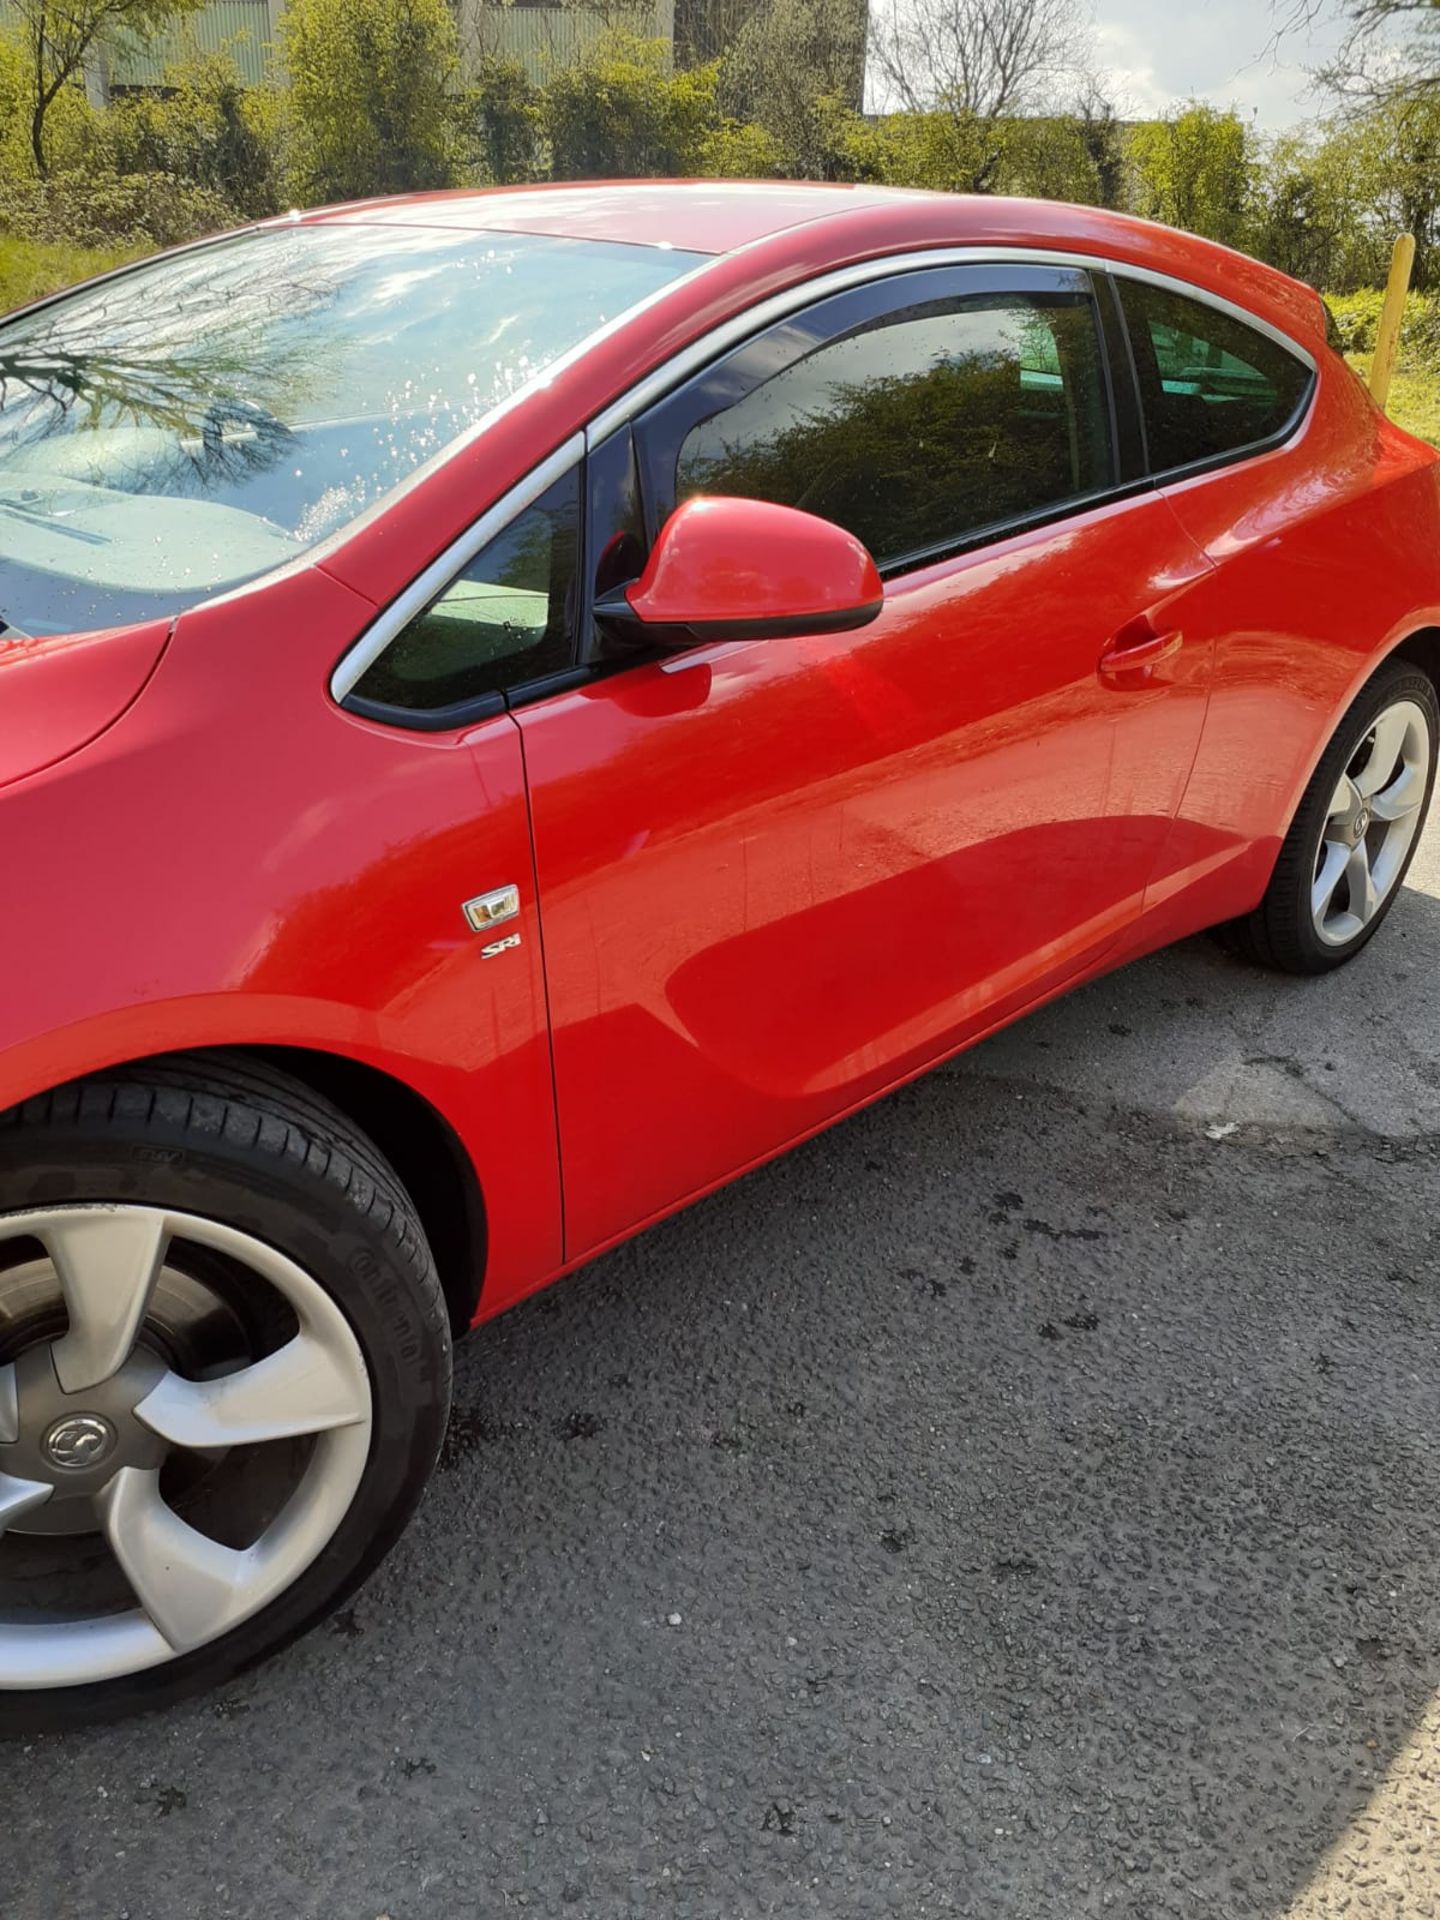 2013 VAUXHALL ASTRA GTC SRI CDTI S/S, 3 DOOR HATCHBACK, SHOWING 3 PREVIOUS KEEPERS, DIESEL ENGINE - Image 3 of 16